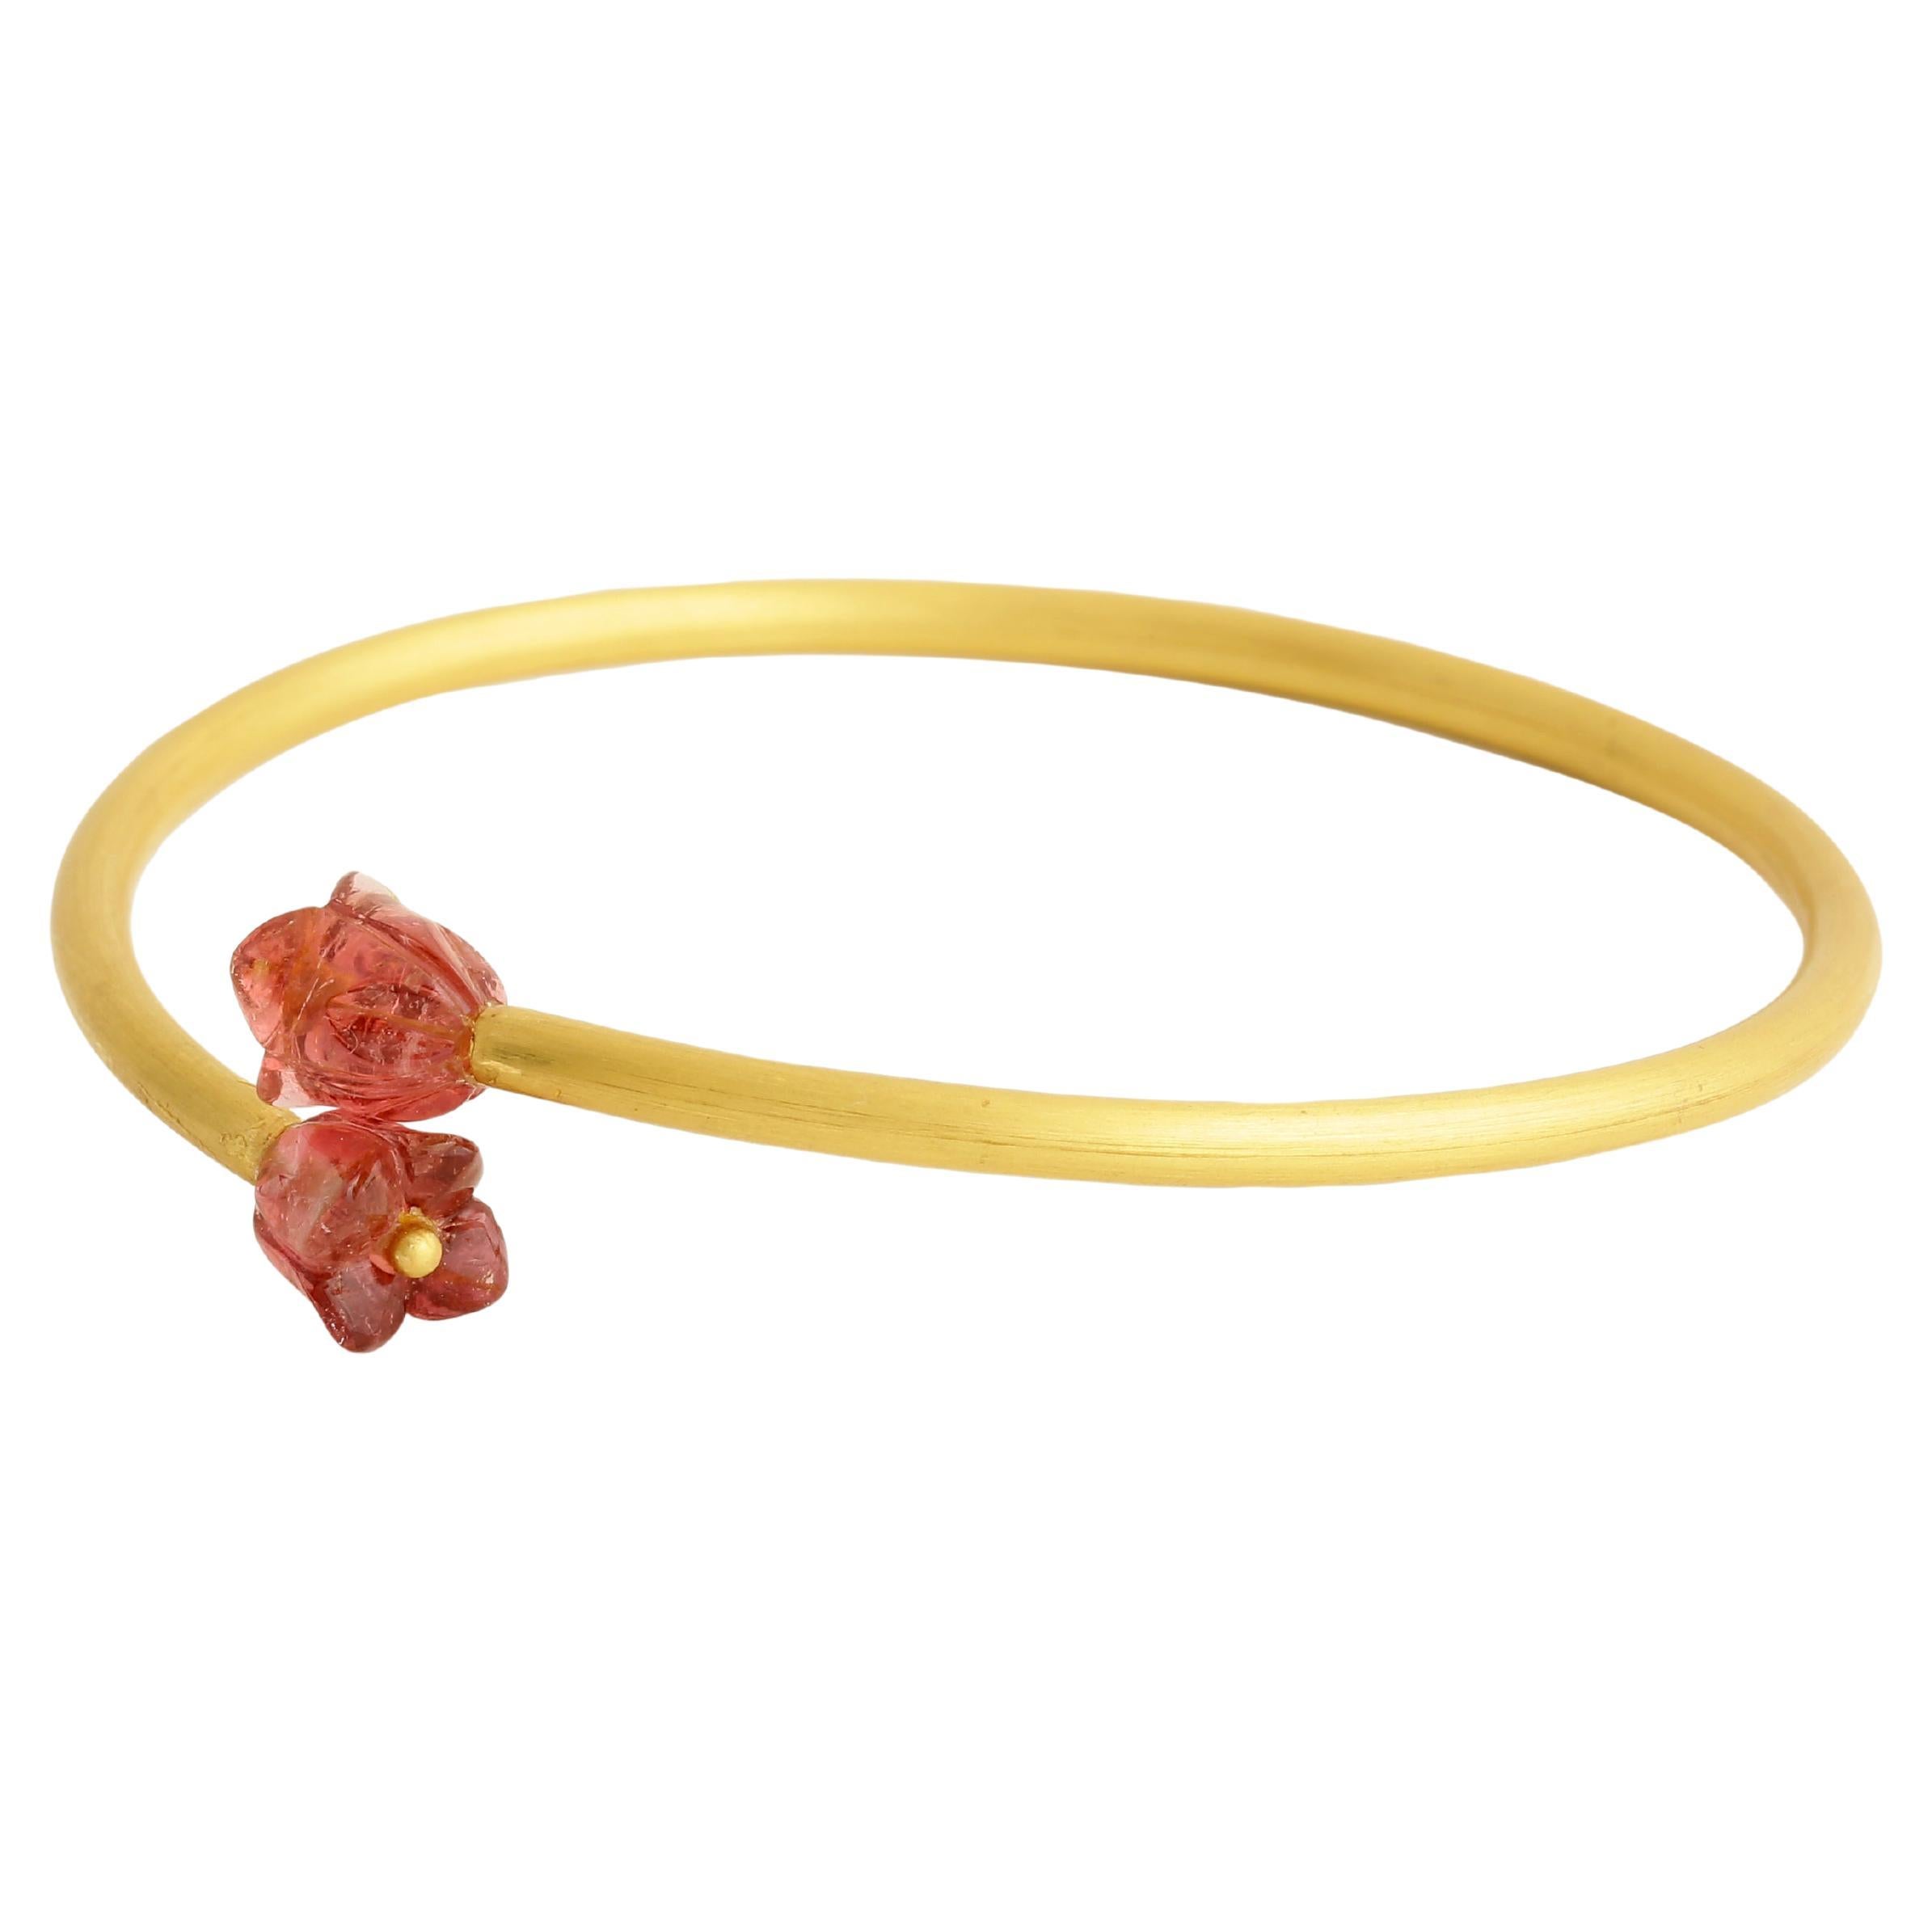 22Karat Gold handcrafted flexible bangle with a pair of tourmaline Flower